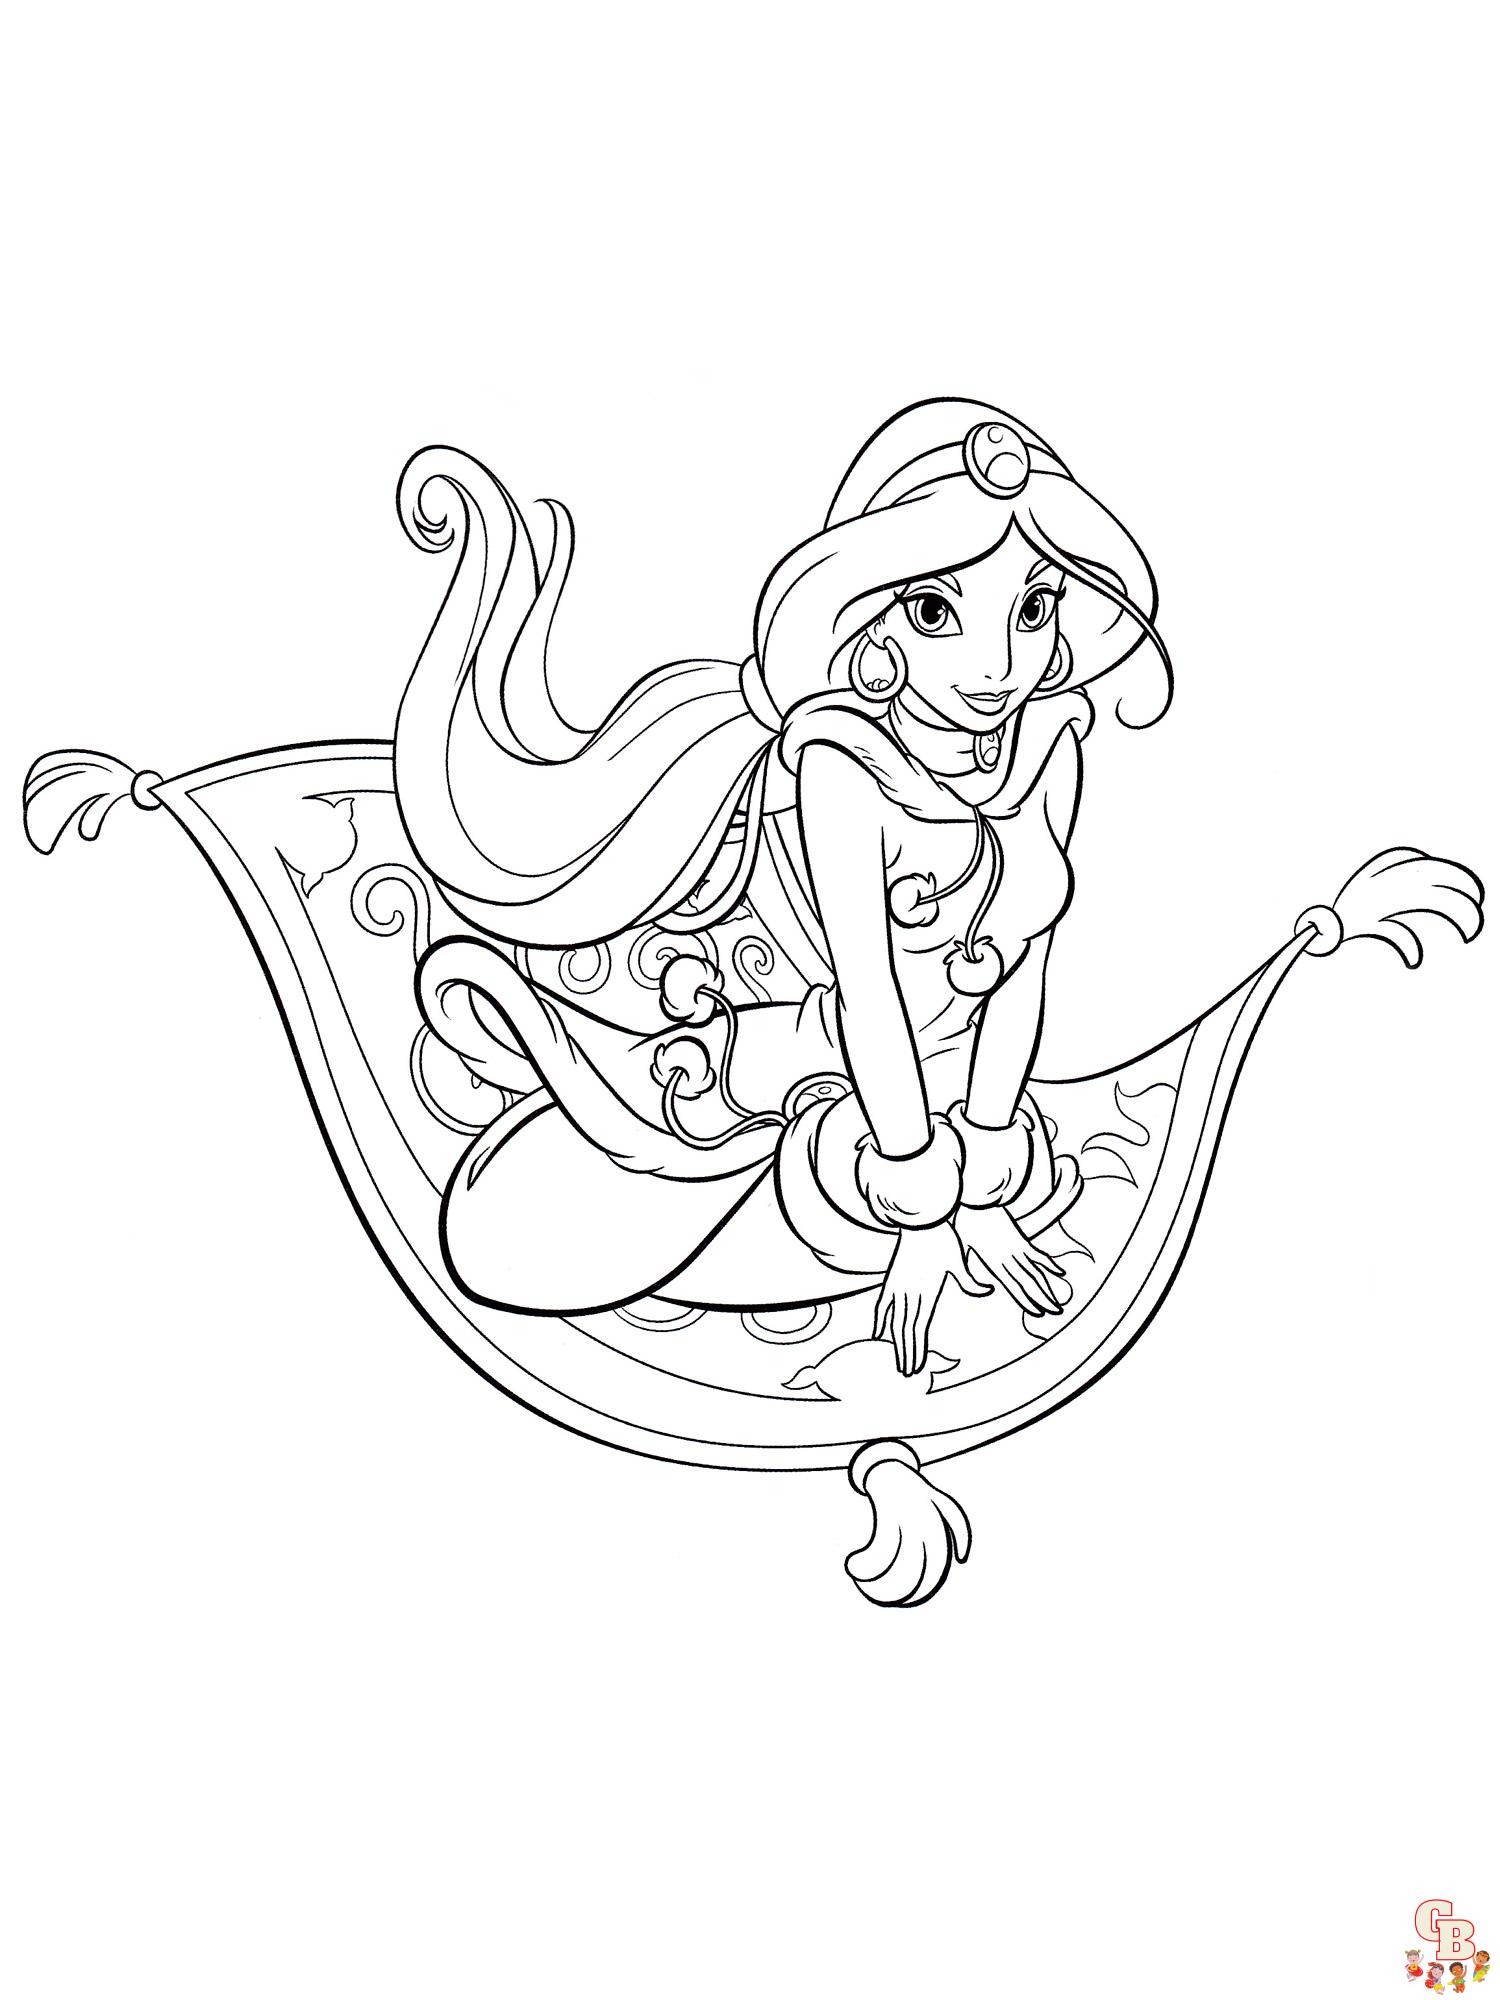 Coloring Pages Jasmine 20